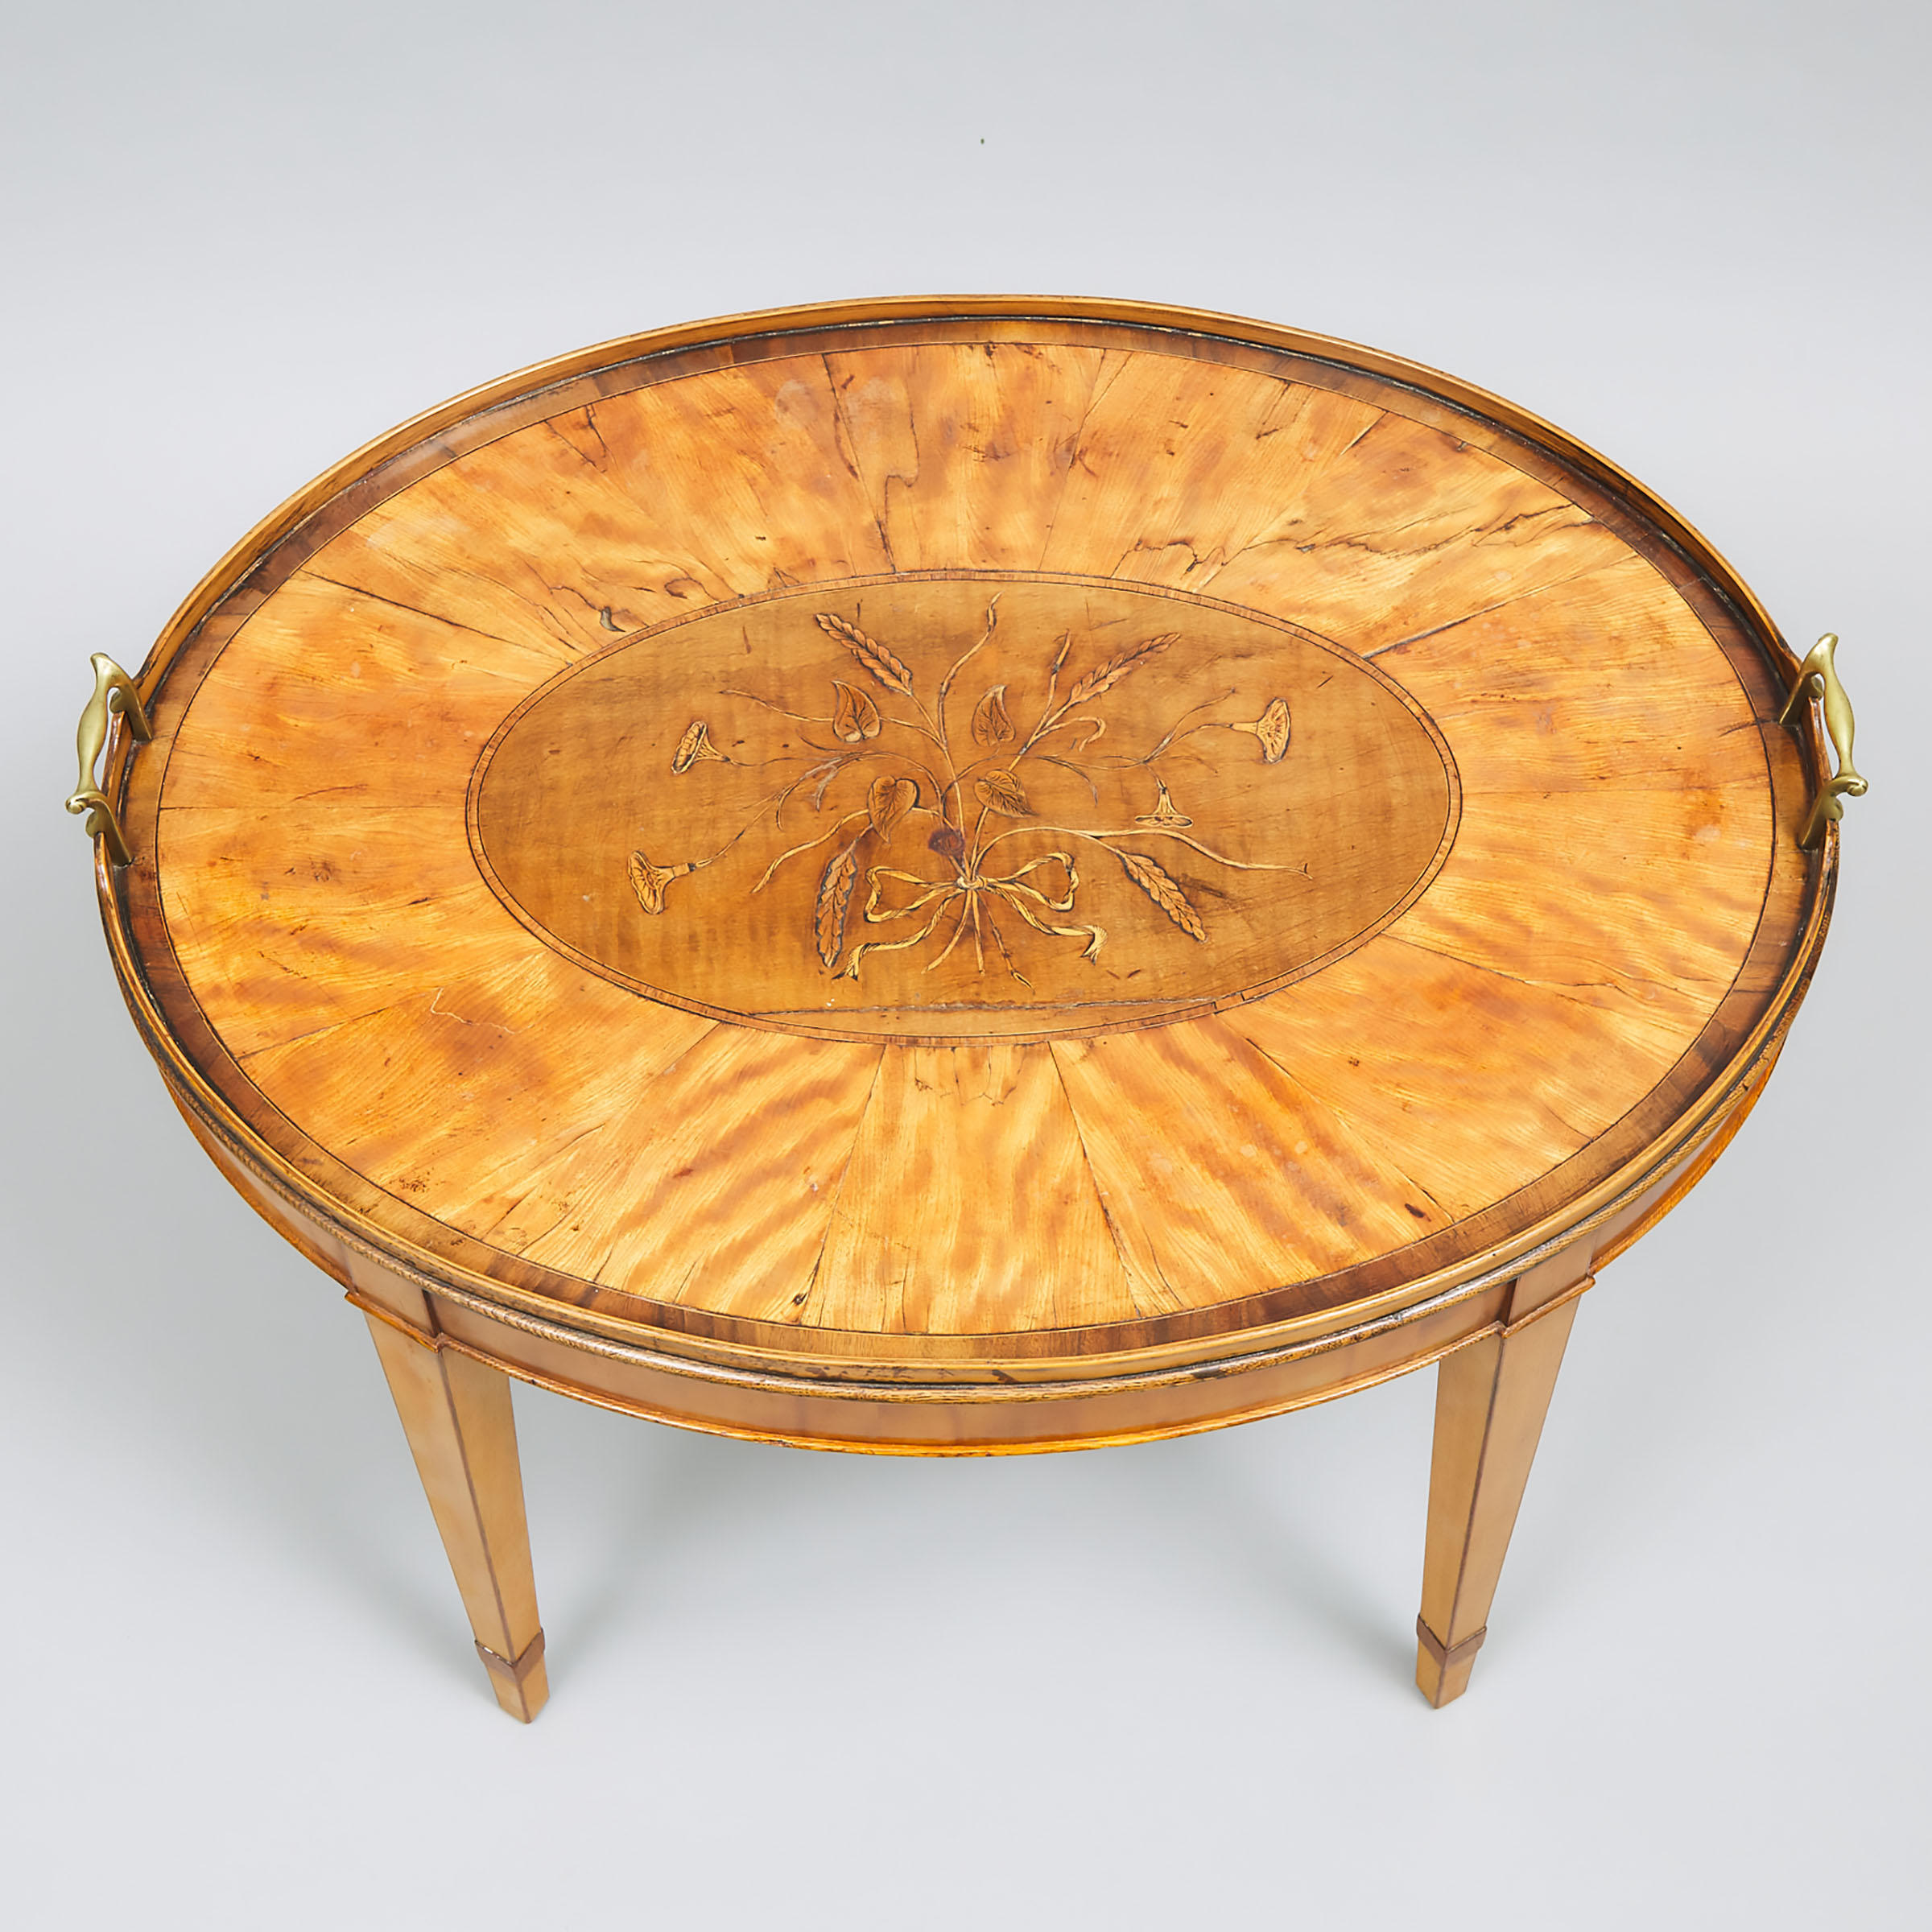 English Inlaid Walnut and Satinwood Tea Tray on Stand, early 19th century and Later